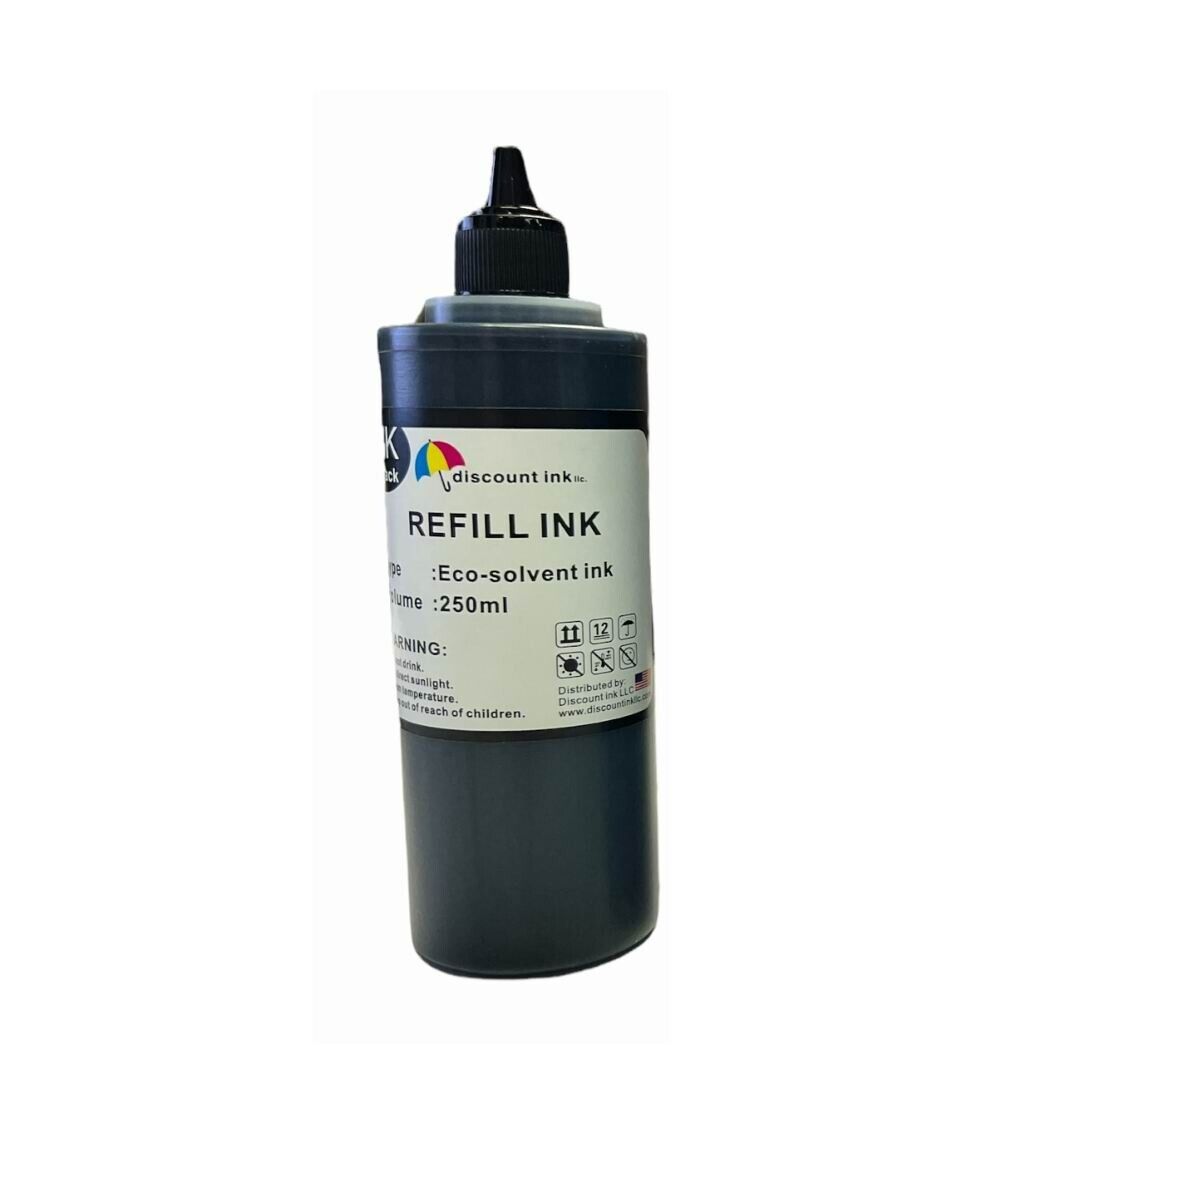 ECO Solvent (water based) ink 250ml Black Compatible with Epson printers